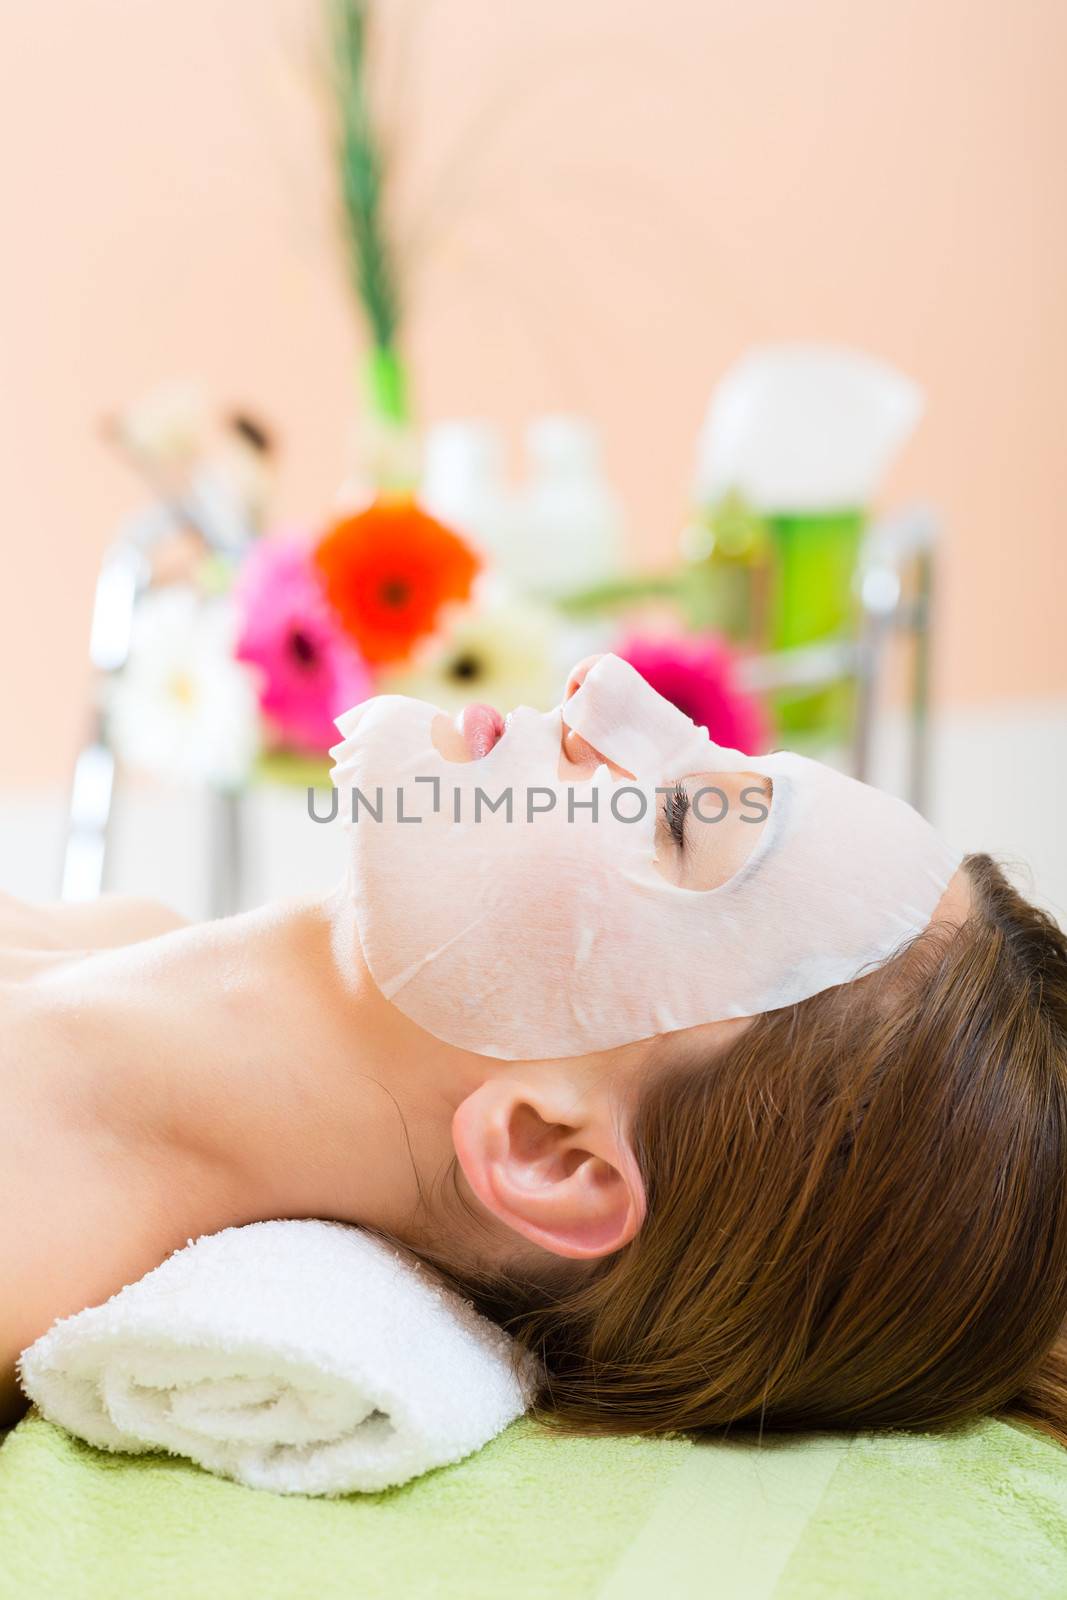 Wellness - woman getting face mask in spa by Kzenon